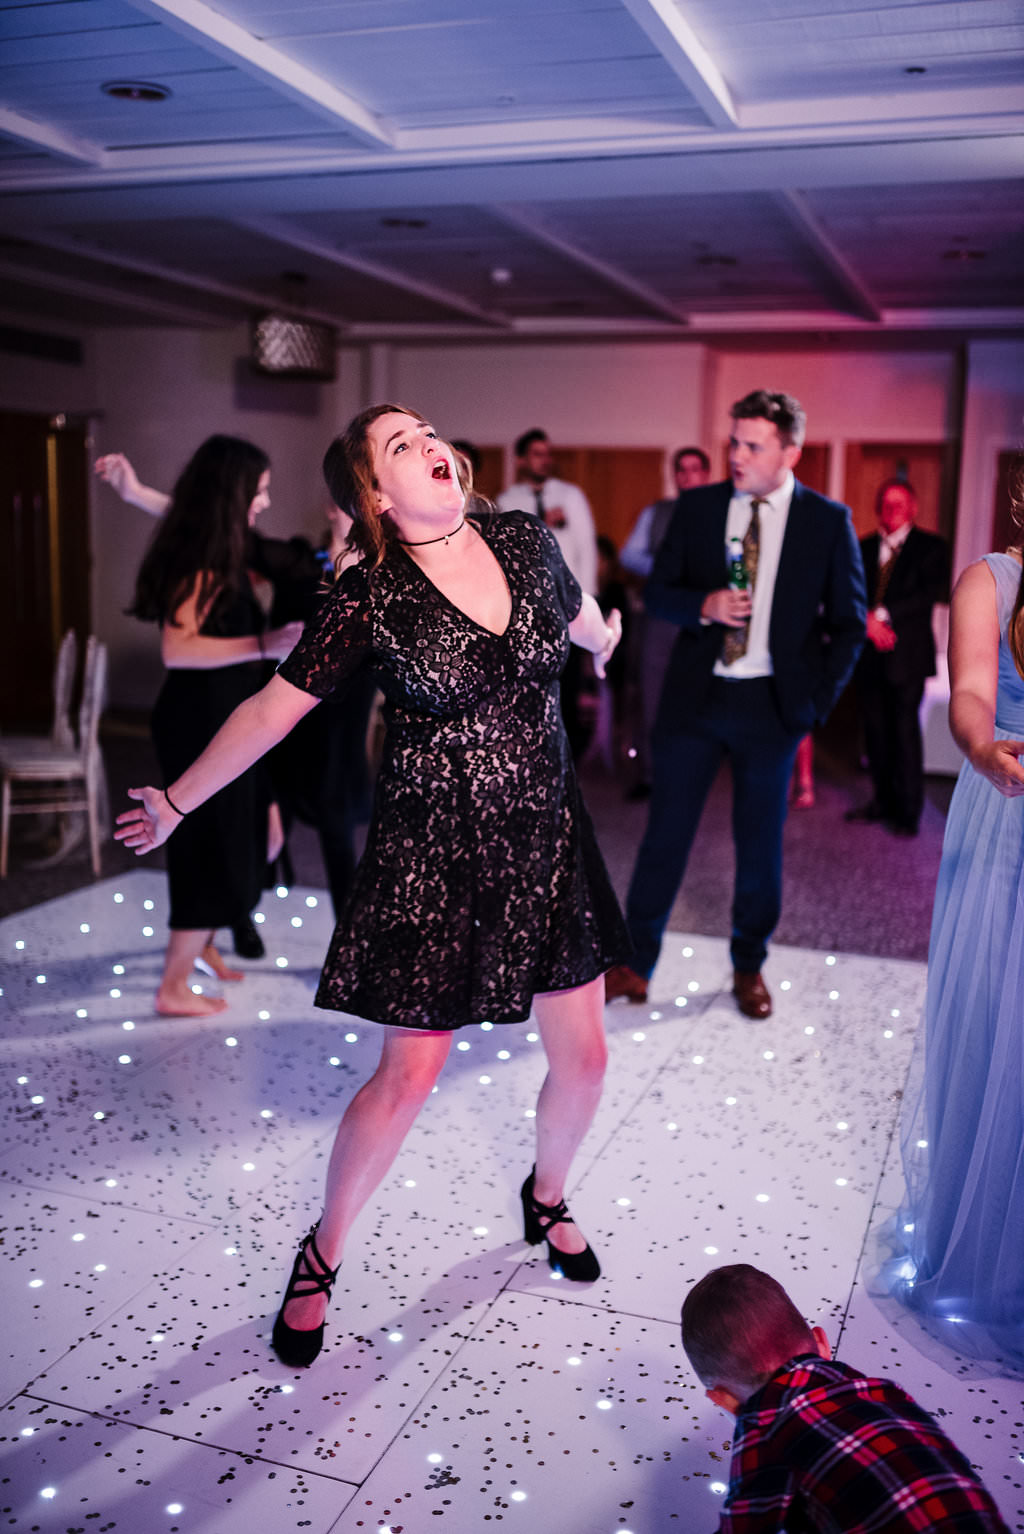 Fun photo of guest dancing. Stanley house wedding photography